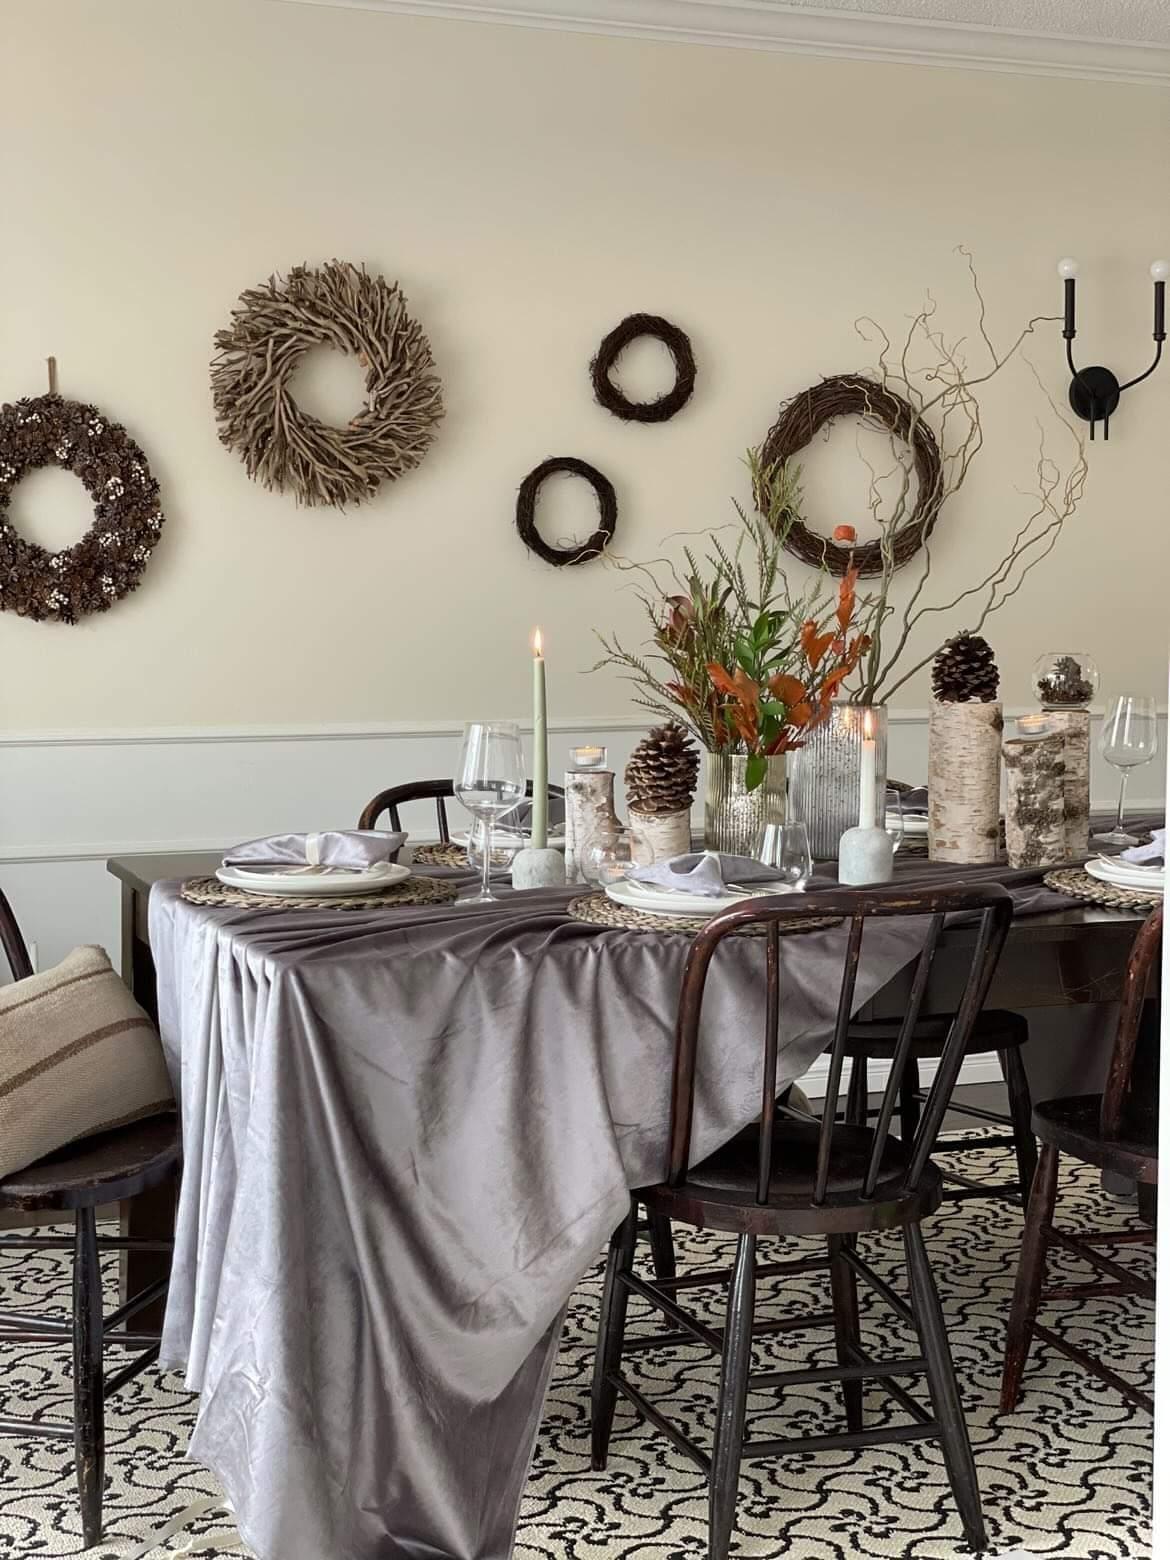 Slate PREORDER: Velvet Tablecloths For home table settings and home decor or dinner party